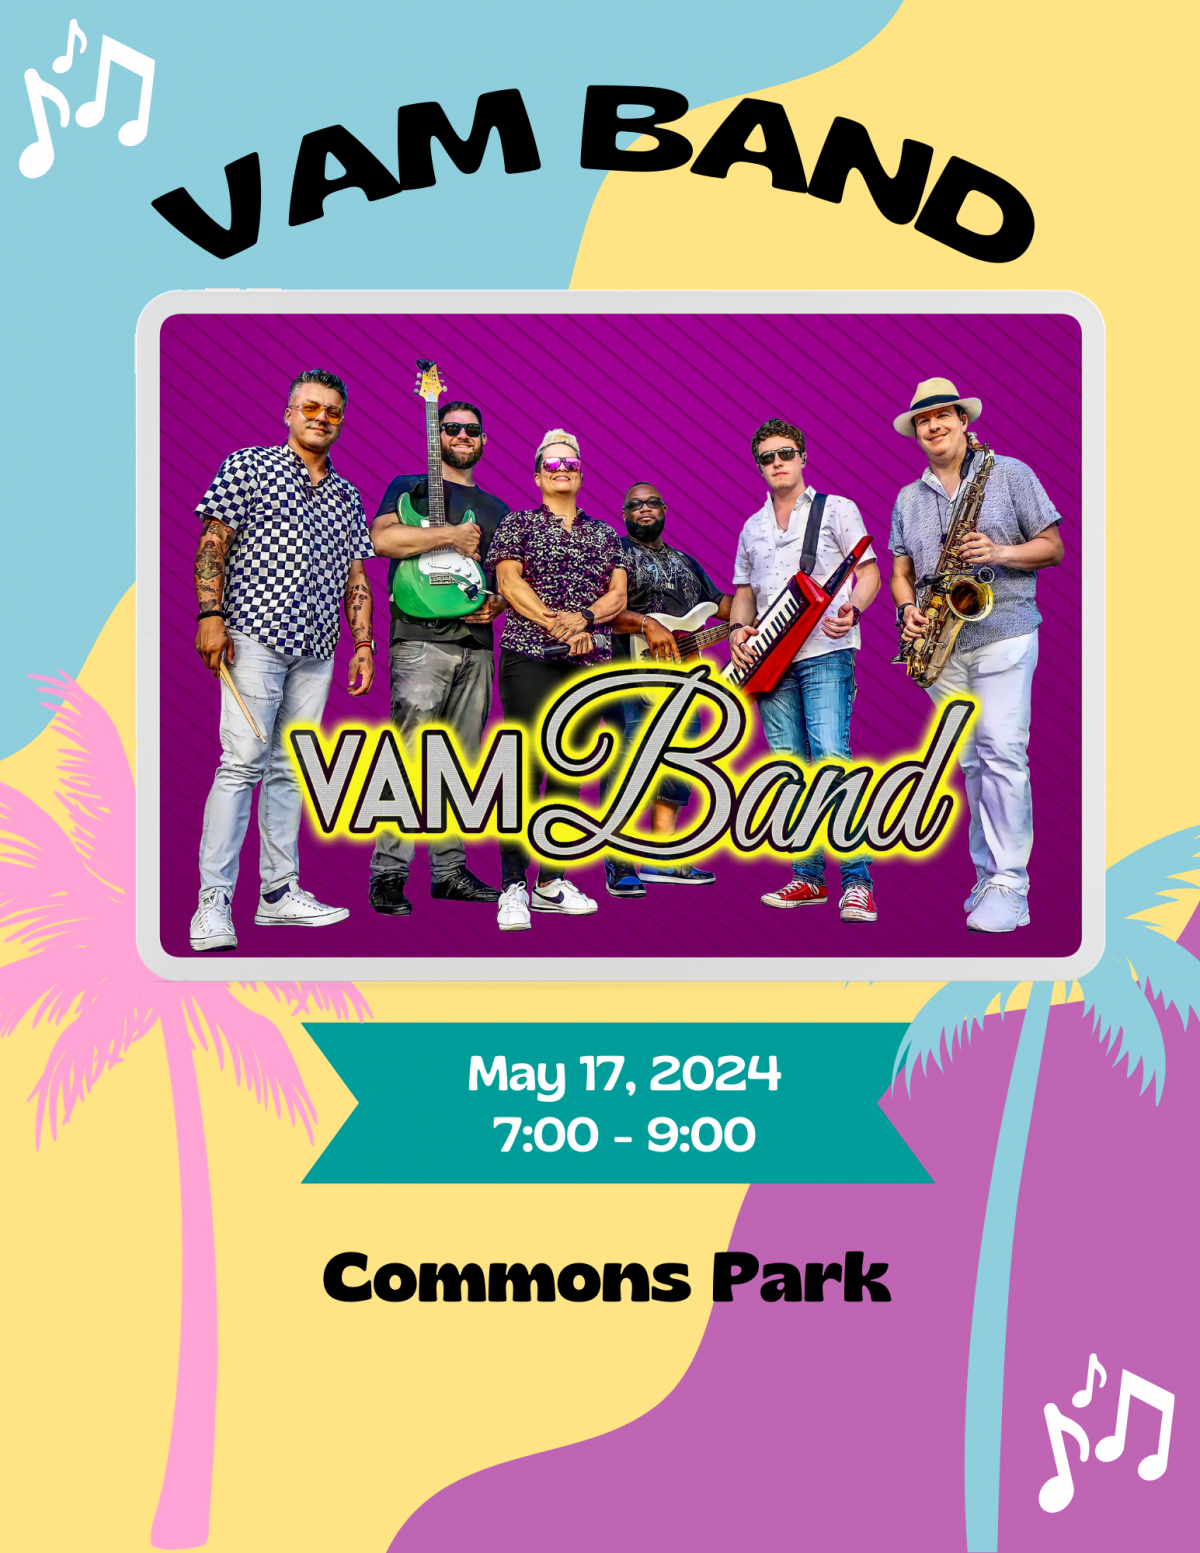  Food Truck Expo and Concert: Vam Band